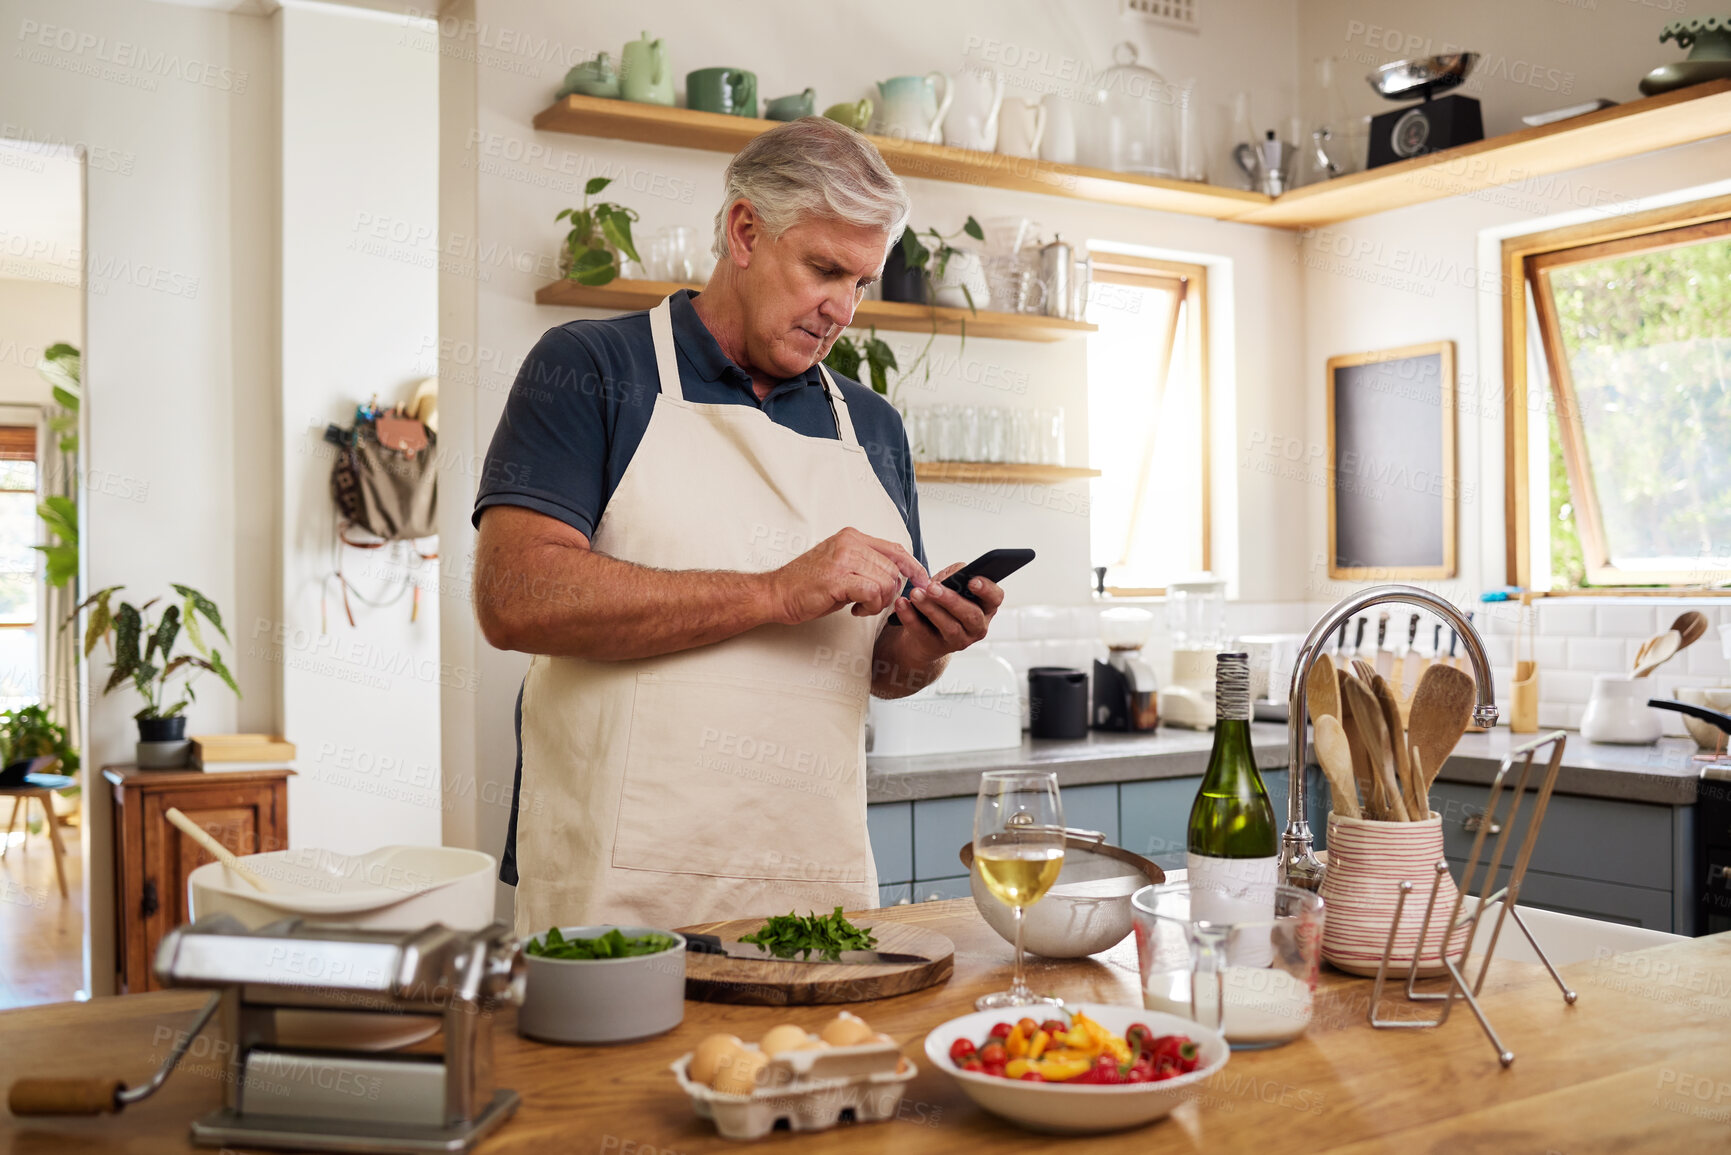 Buy stock photo Senior man, retirement and cooking in kitchen, smartphone and search internet for food recipe, technology and online connection. Healthy diet, chef skill development and research meal ideas.